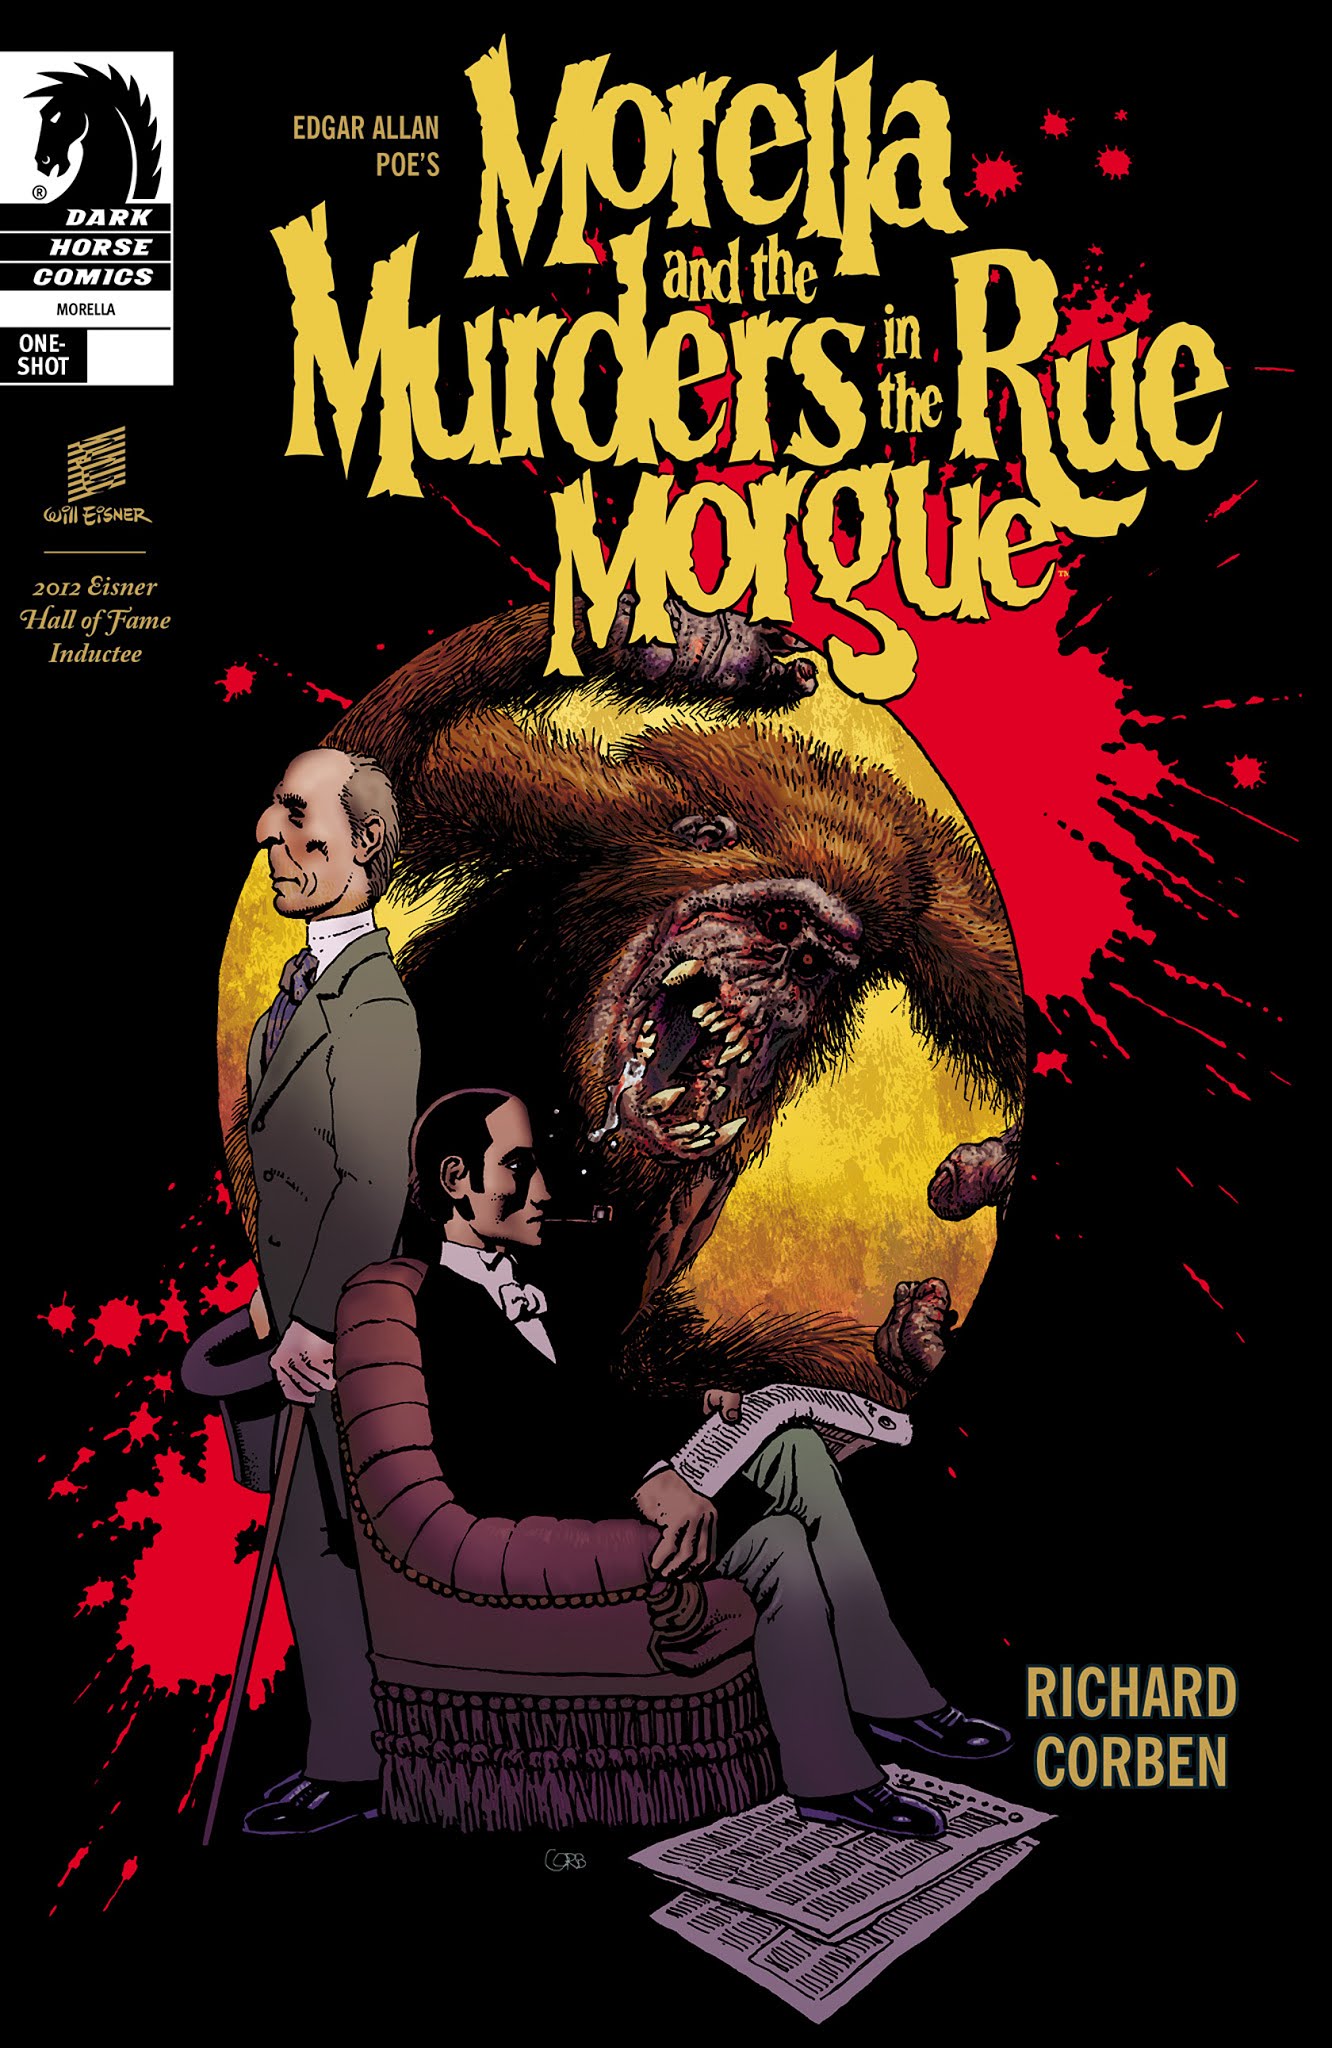 Read online Edgar Allan Poe's Morella and the Murders in the Rue Morgue comic -  Issue # Full - 1